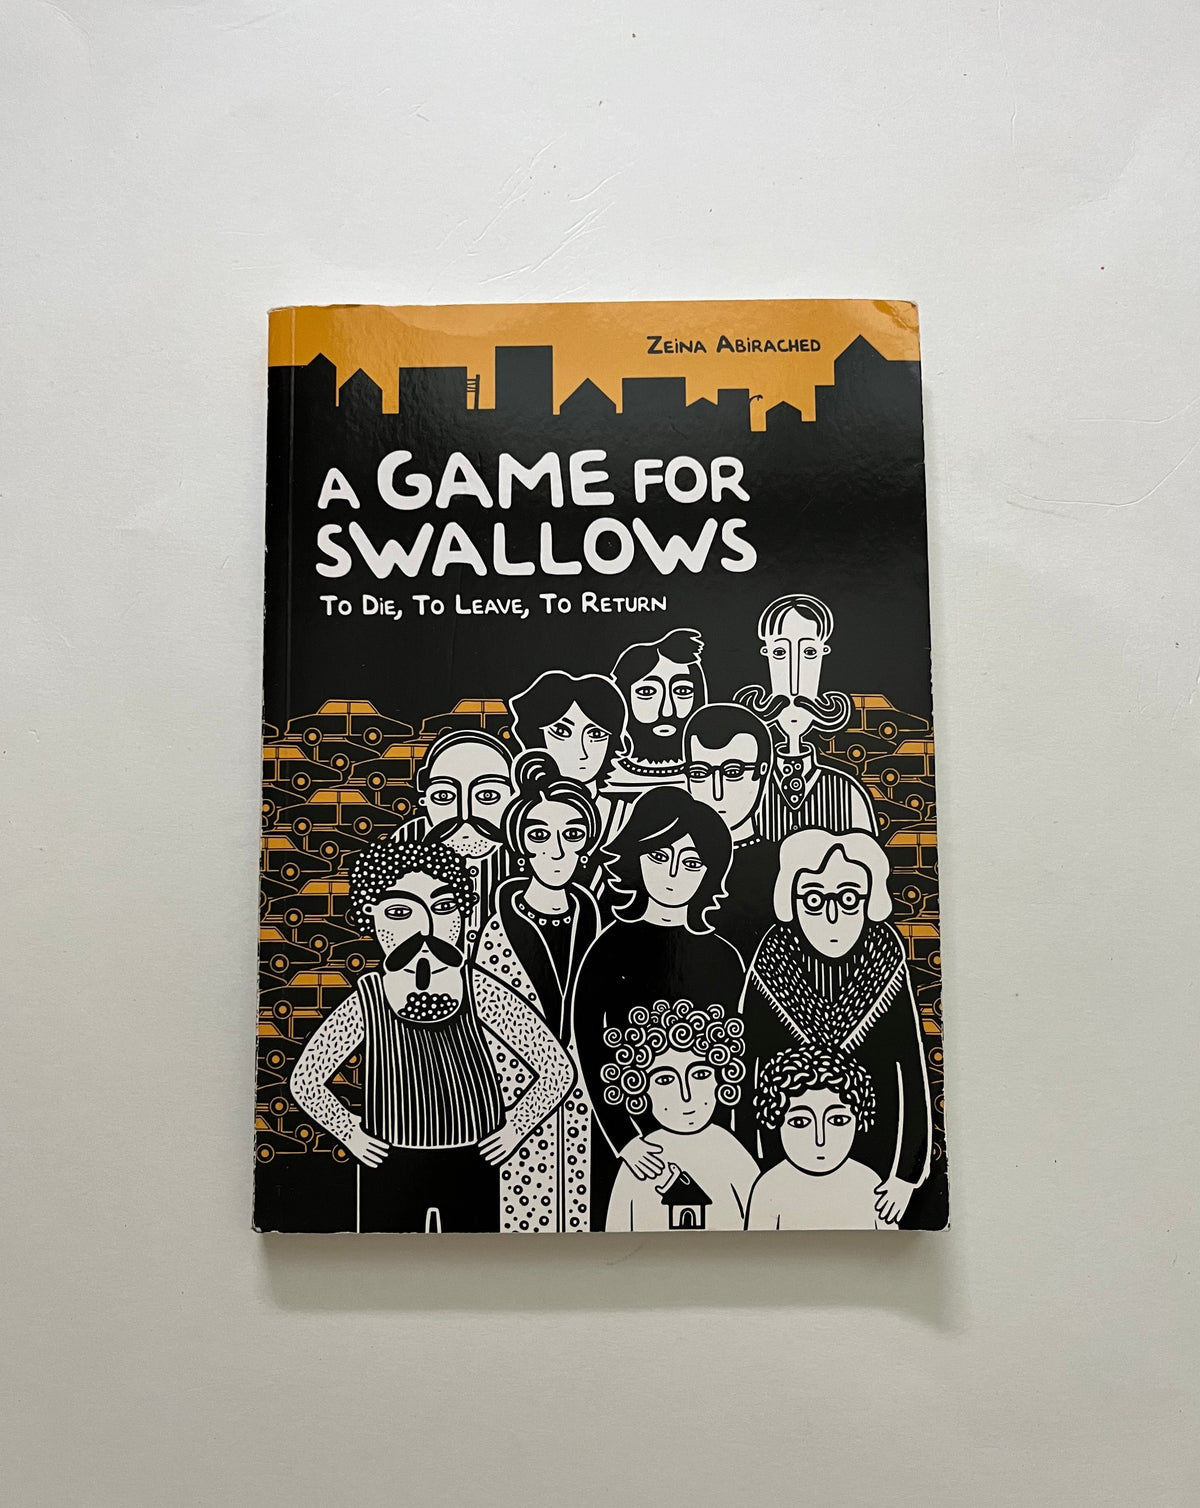 A Game for Swallows: to Die, to Leave, to Return by Zeina Abirached